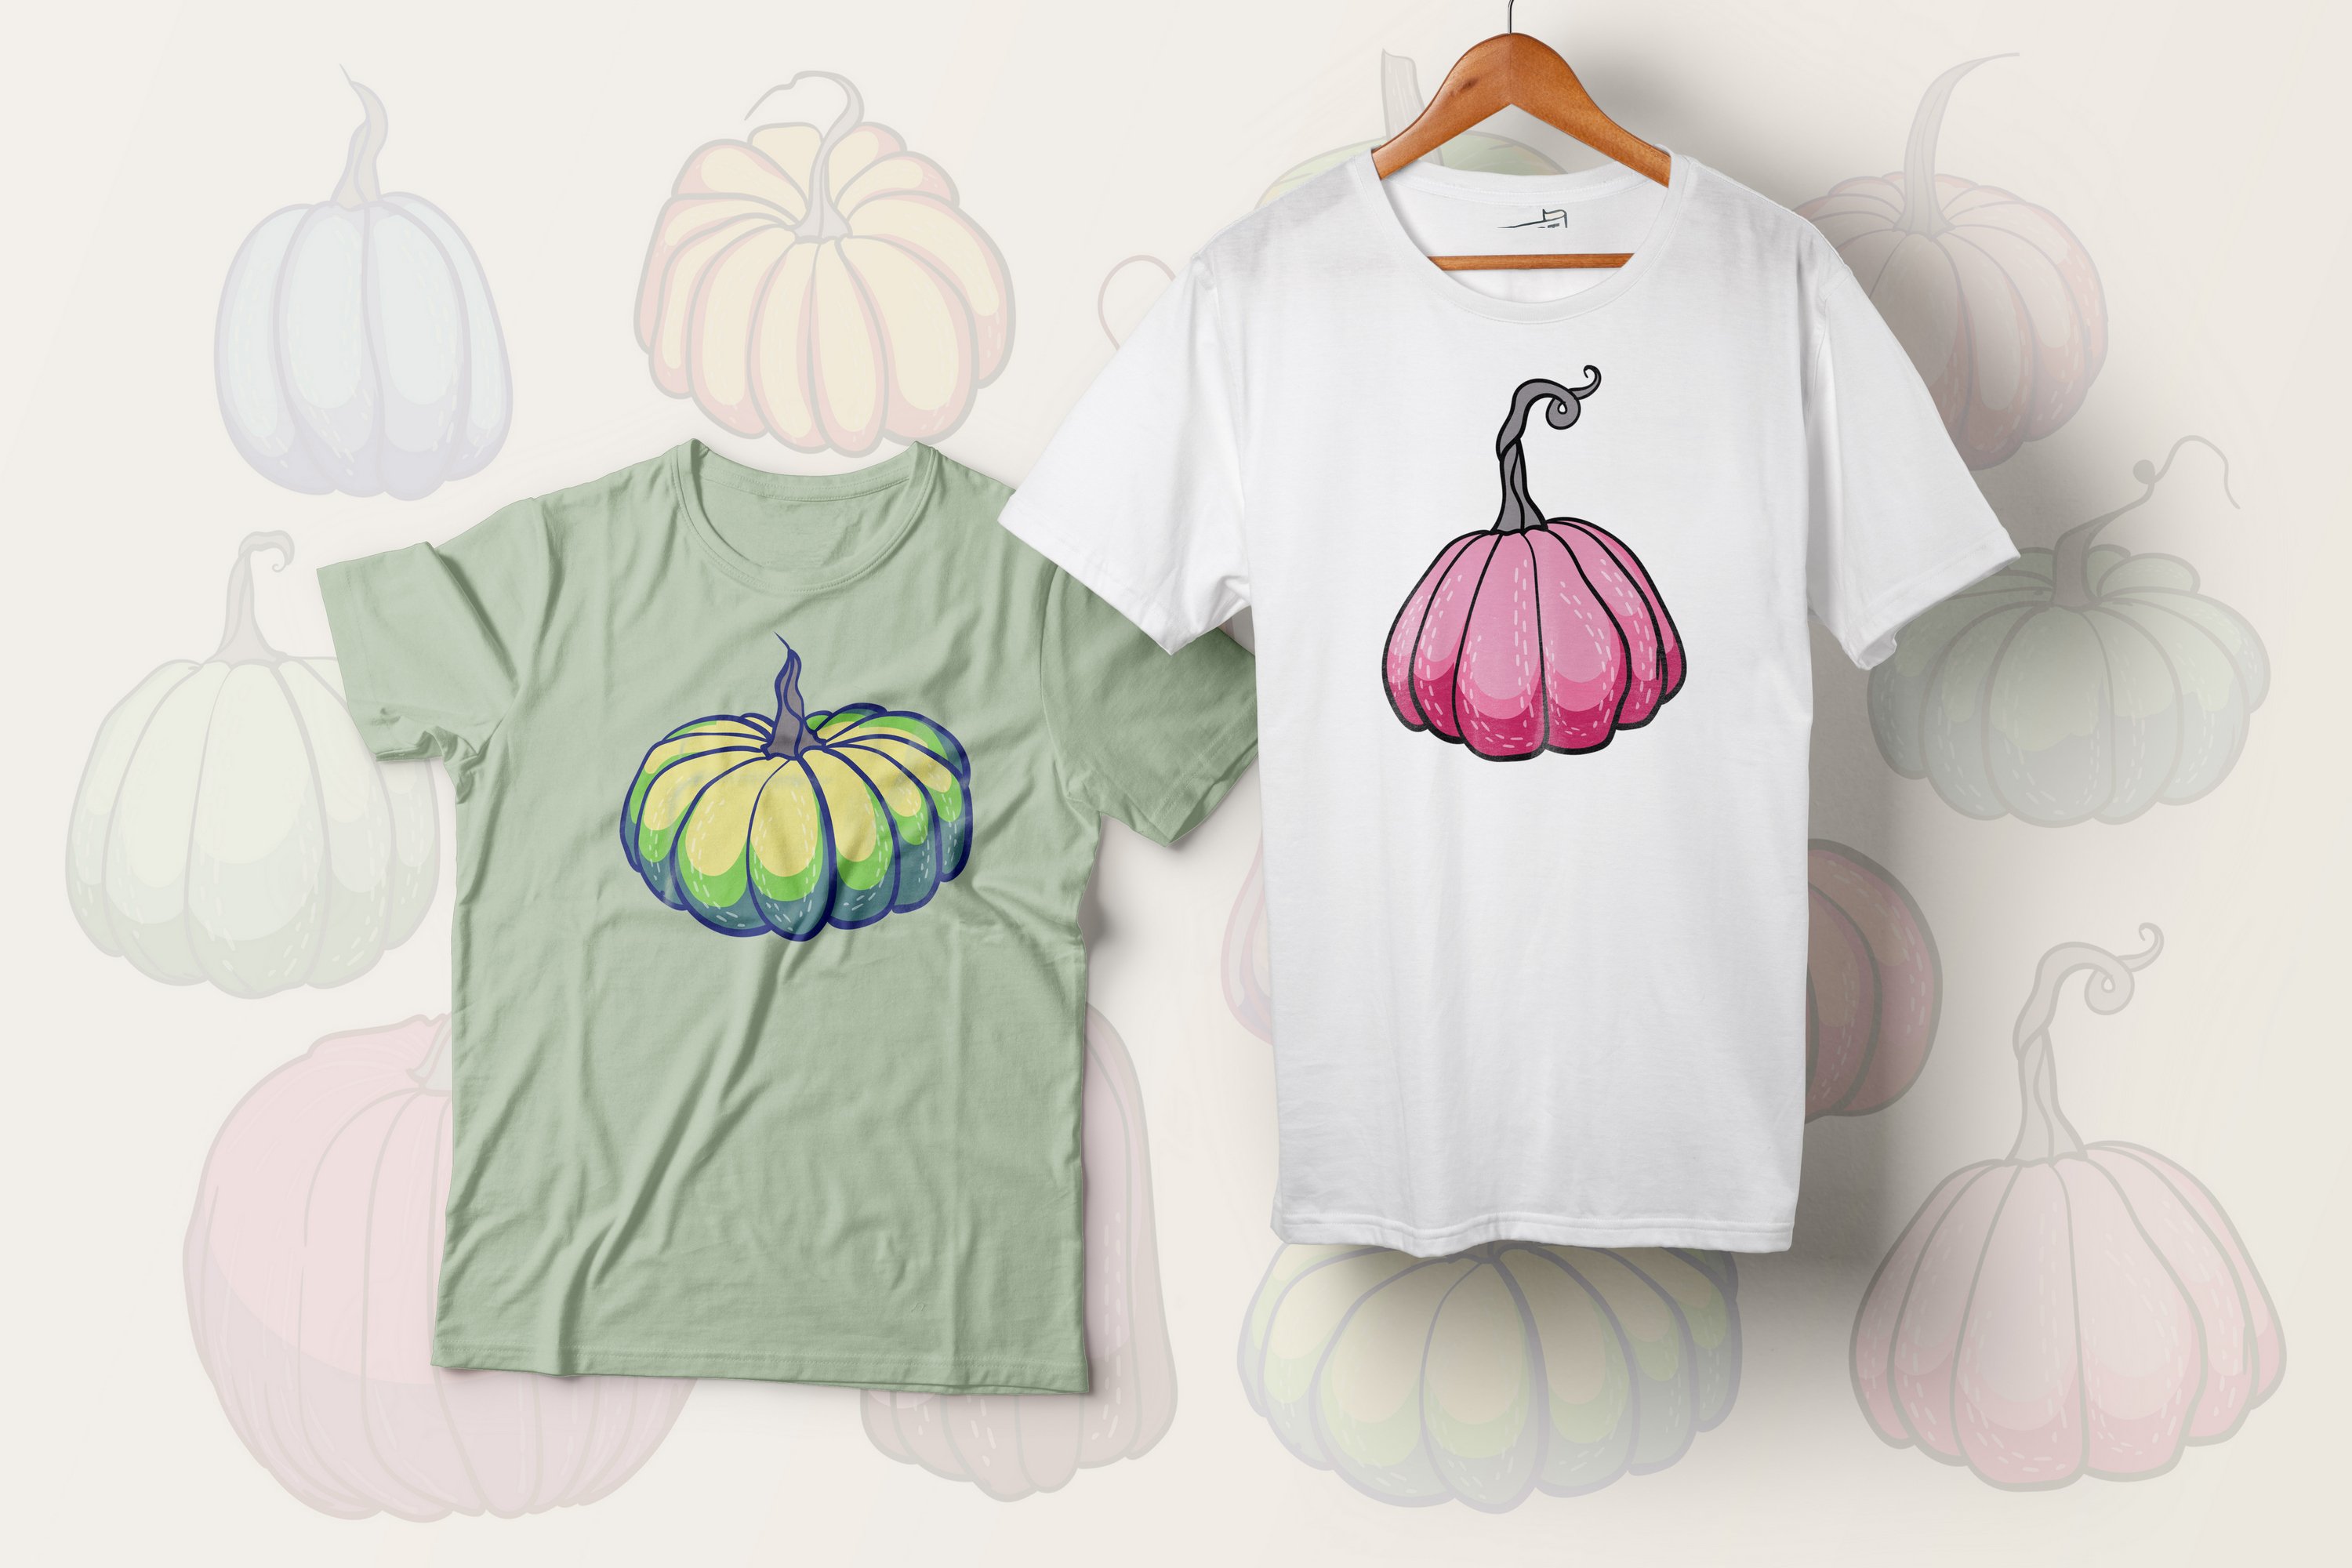 Two t-shirts with pumpkins illustrations.